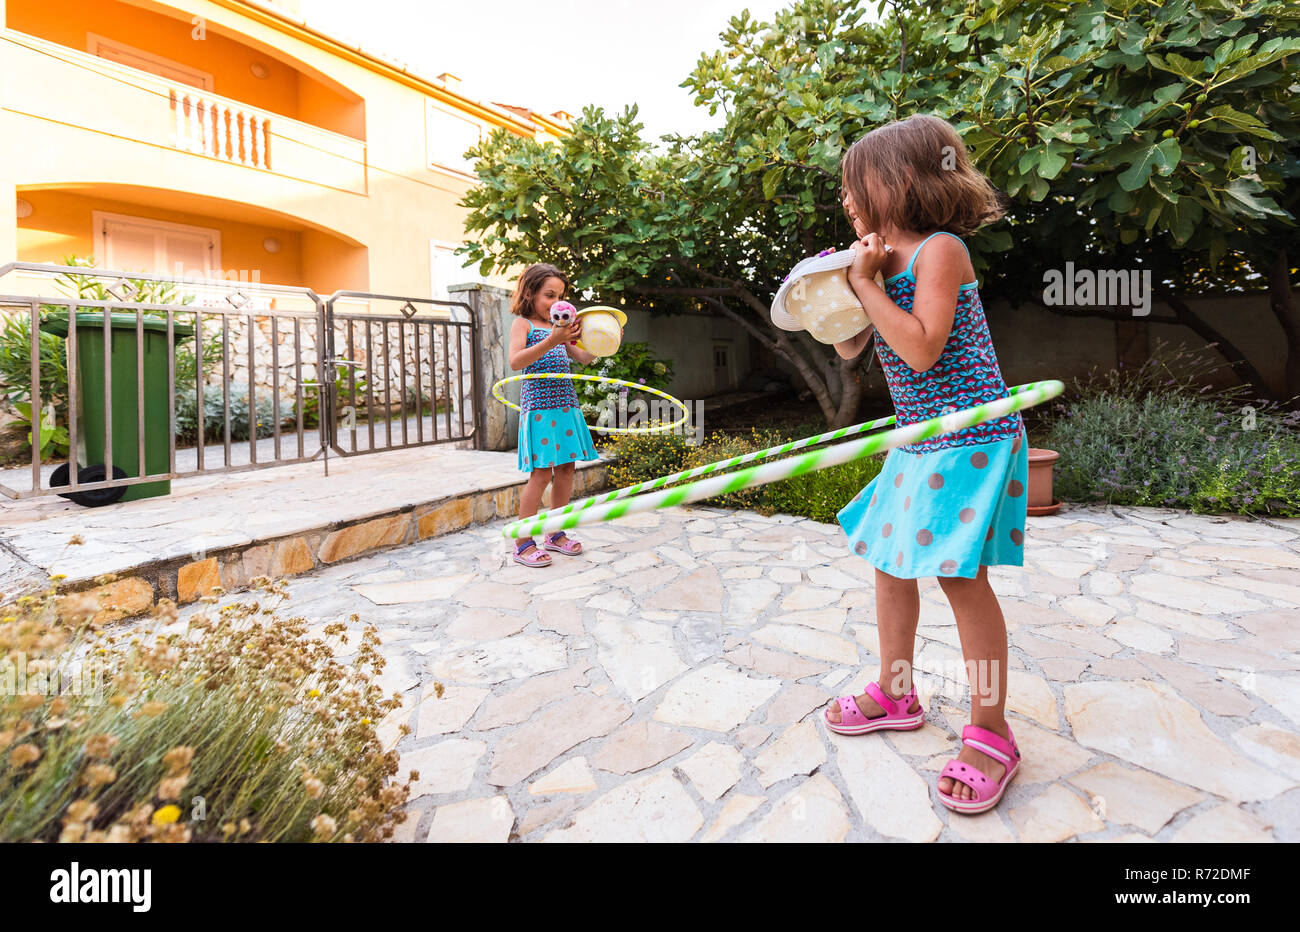 Identical twin sisters are playing on vacation with hula hoop. Sisters wearing blue dresses and hats are enjoying vacation hooping and laughing on sto Stock Photo